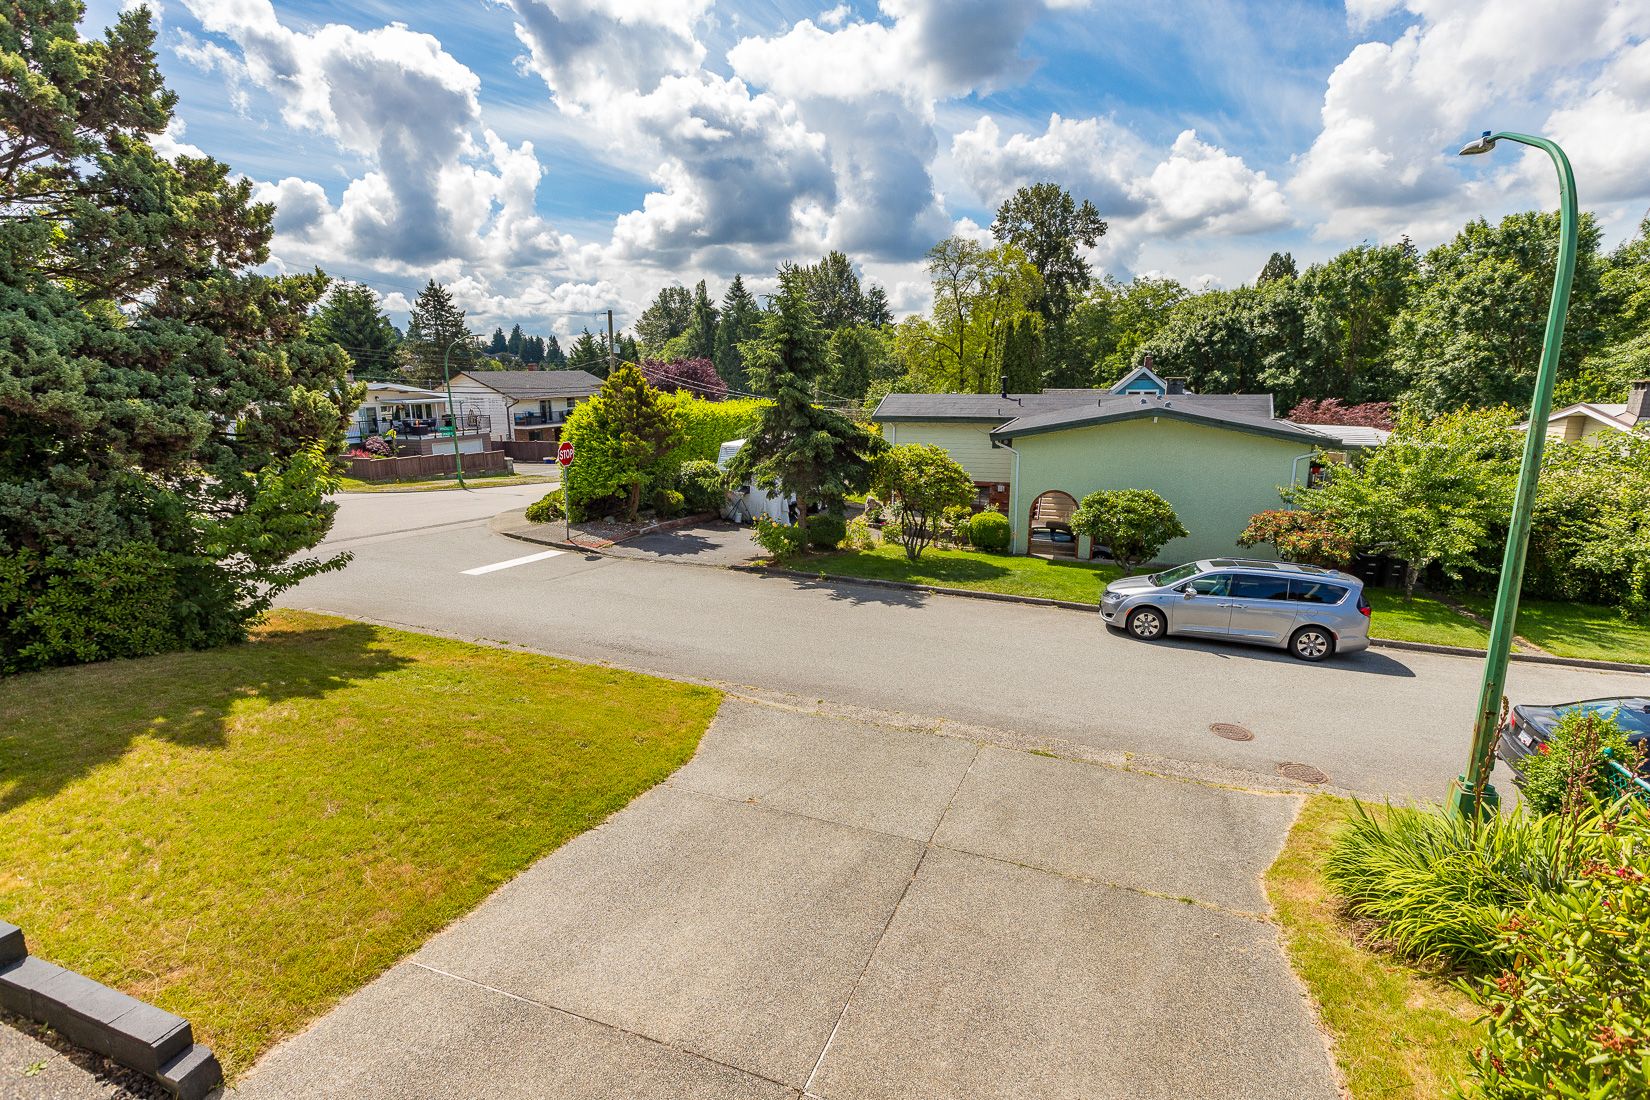 Photo 18: Photos: SPRINGDALE CT in BURNABY: Parkcrest House for sale (Burnaby North)  : MLS®# R2591718